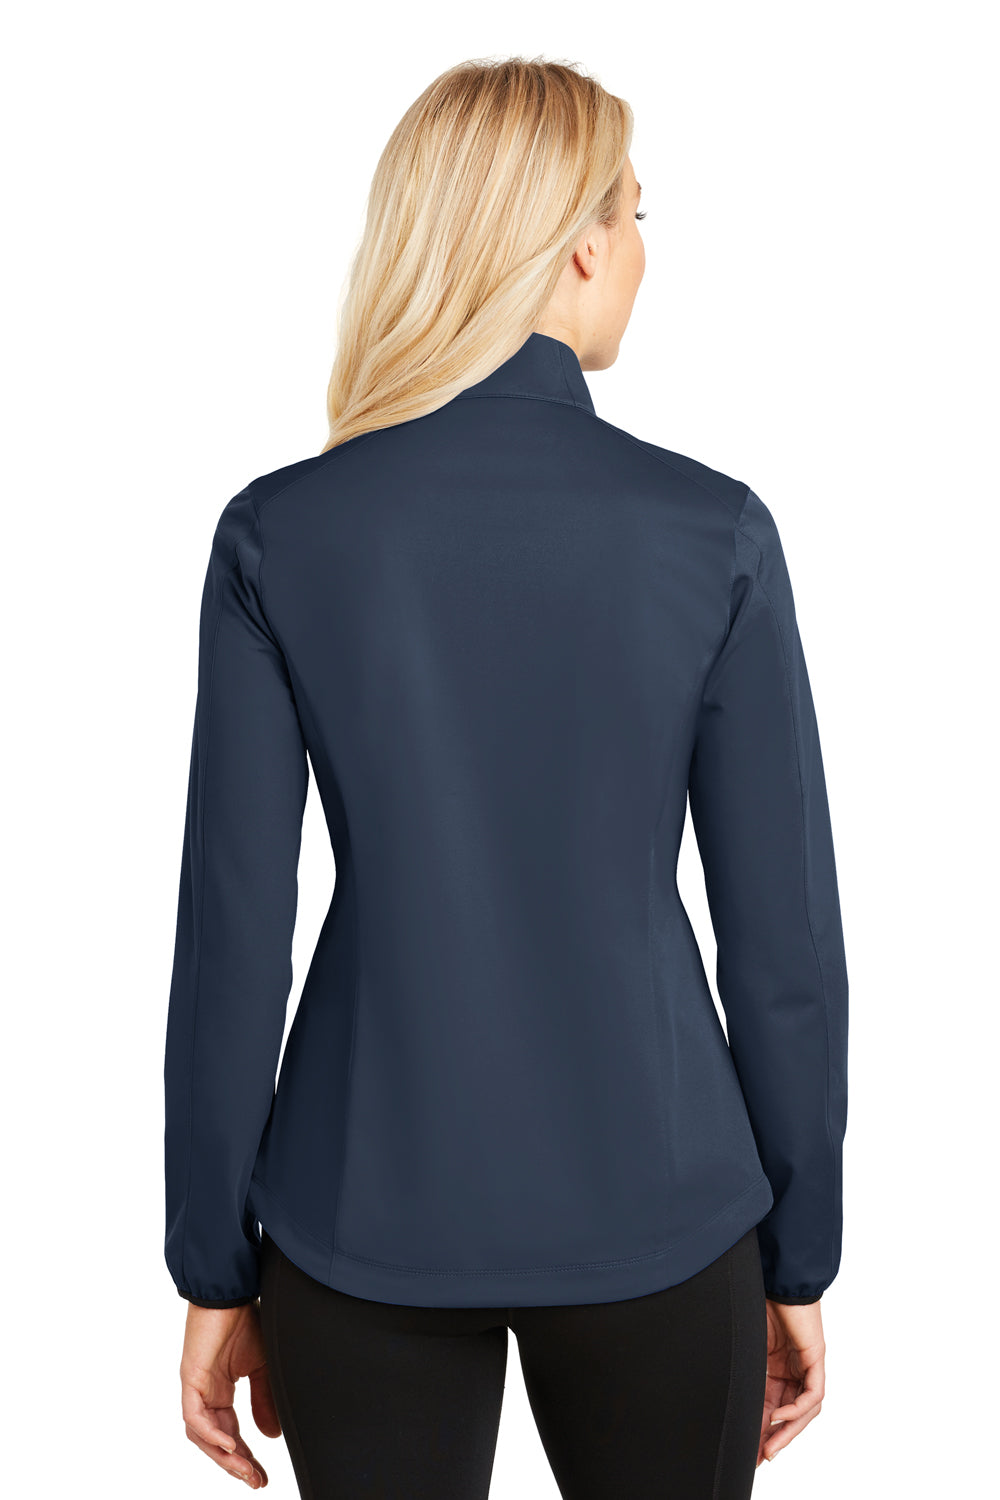 Port Authority L717 Womens Active Wind & Water Resistant Full Zip Jacket Navy Blue Back